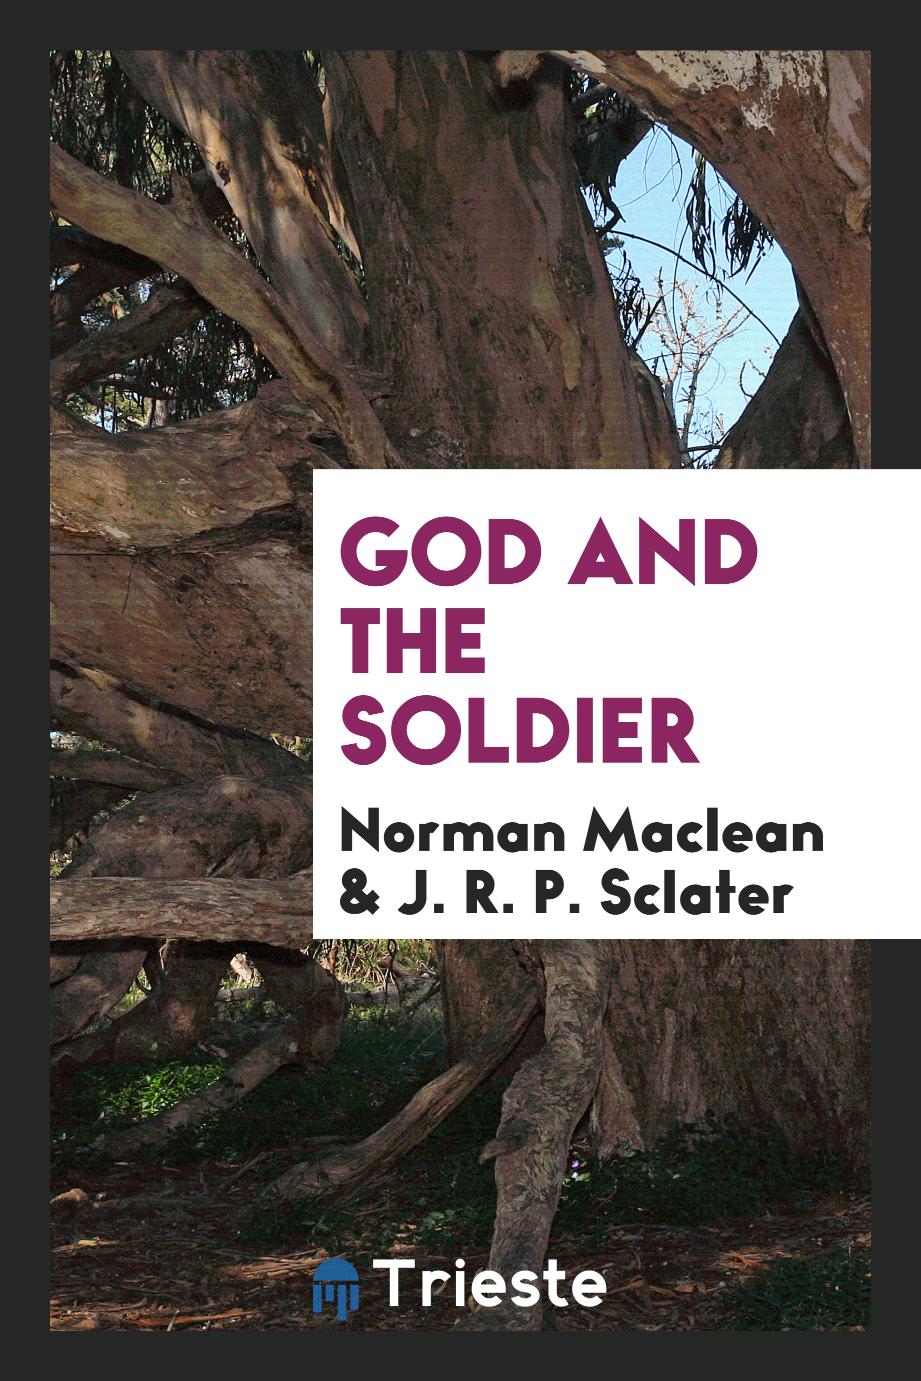 God and the soldier